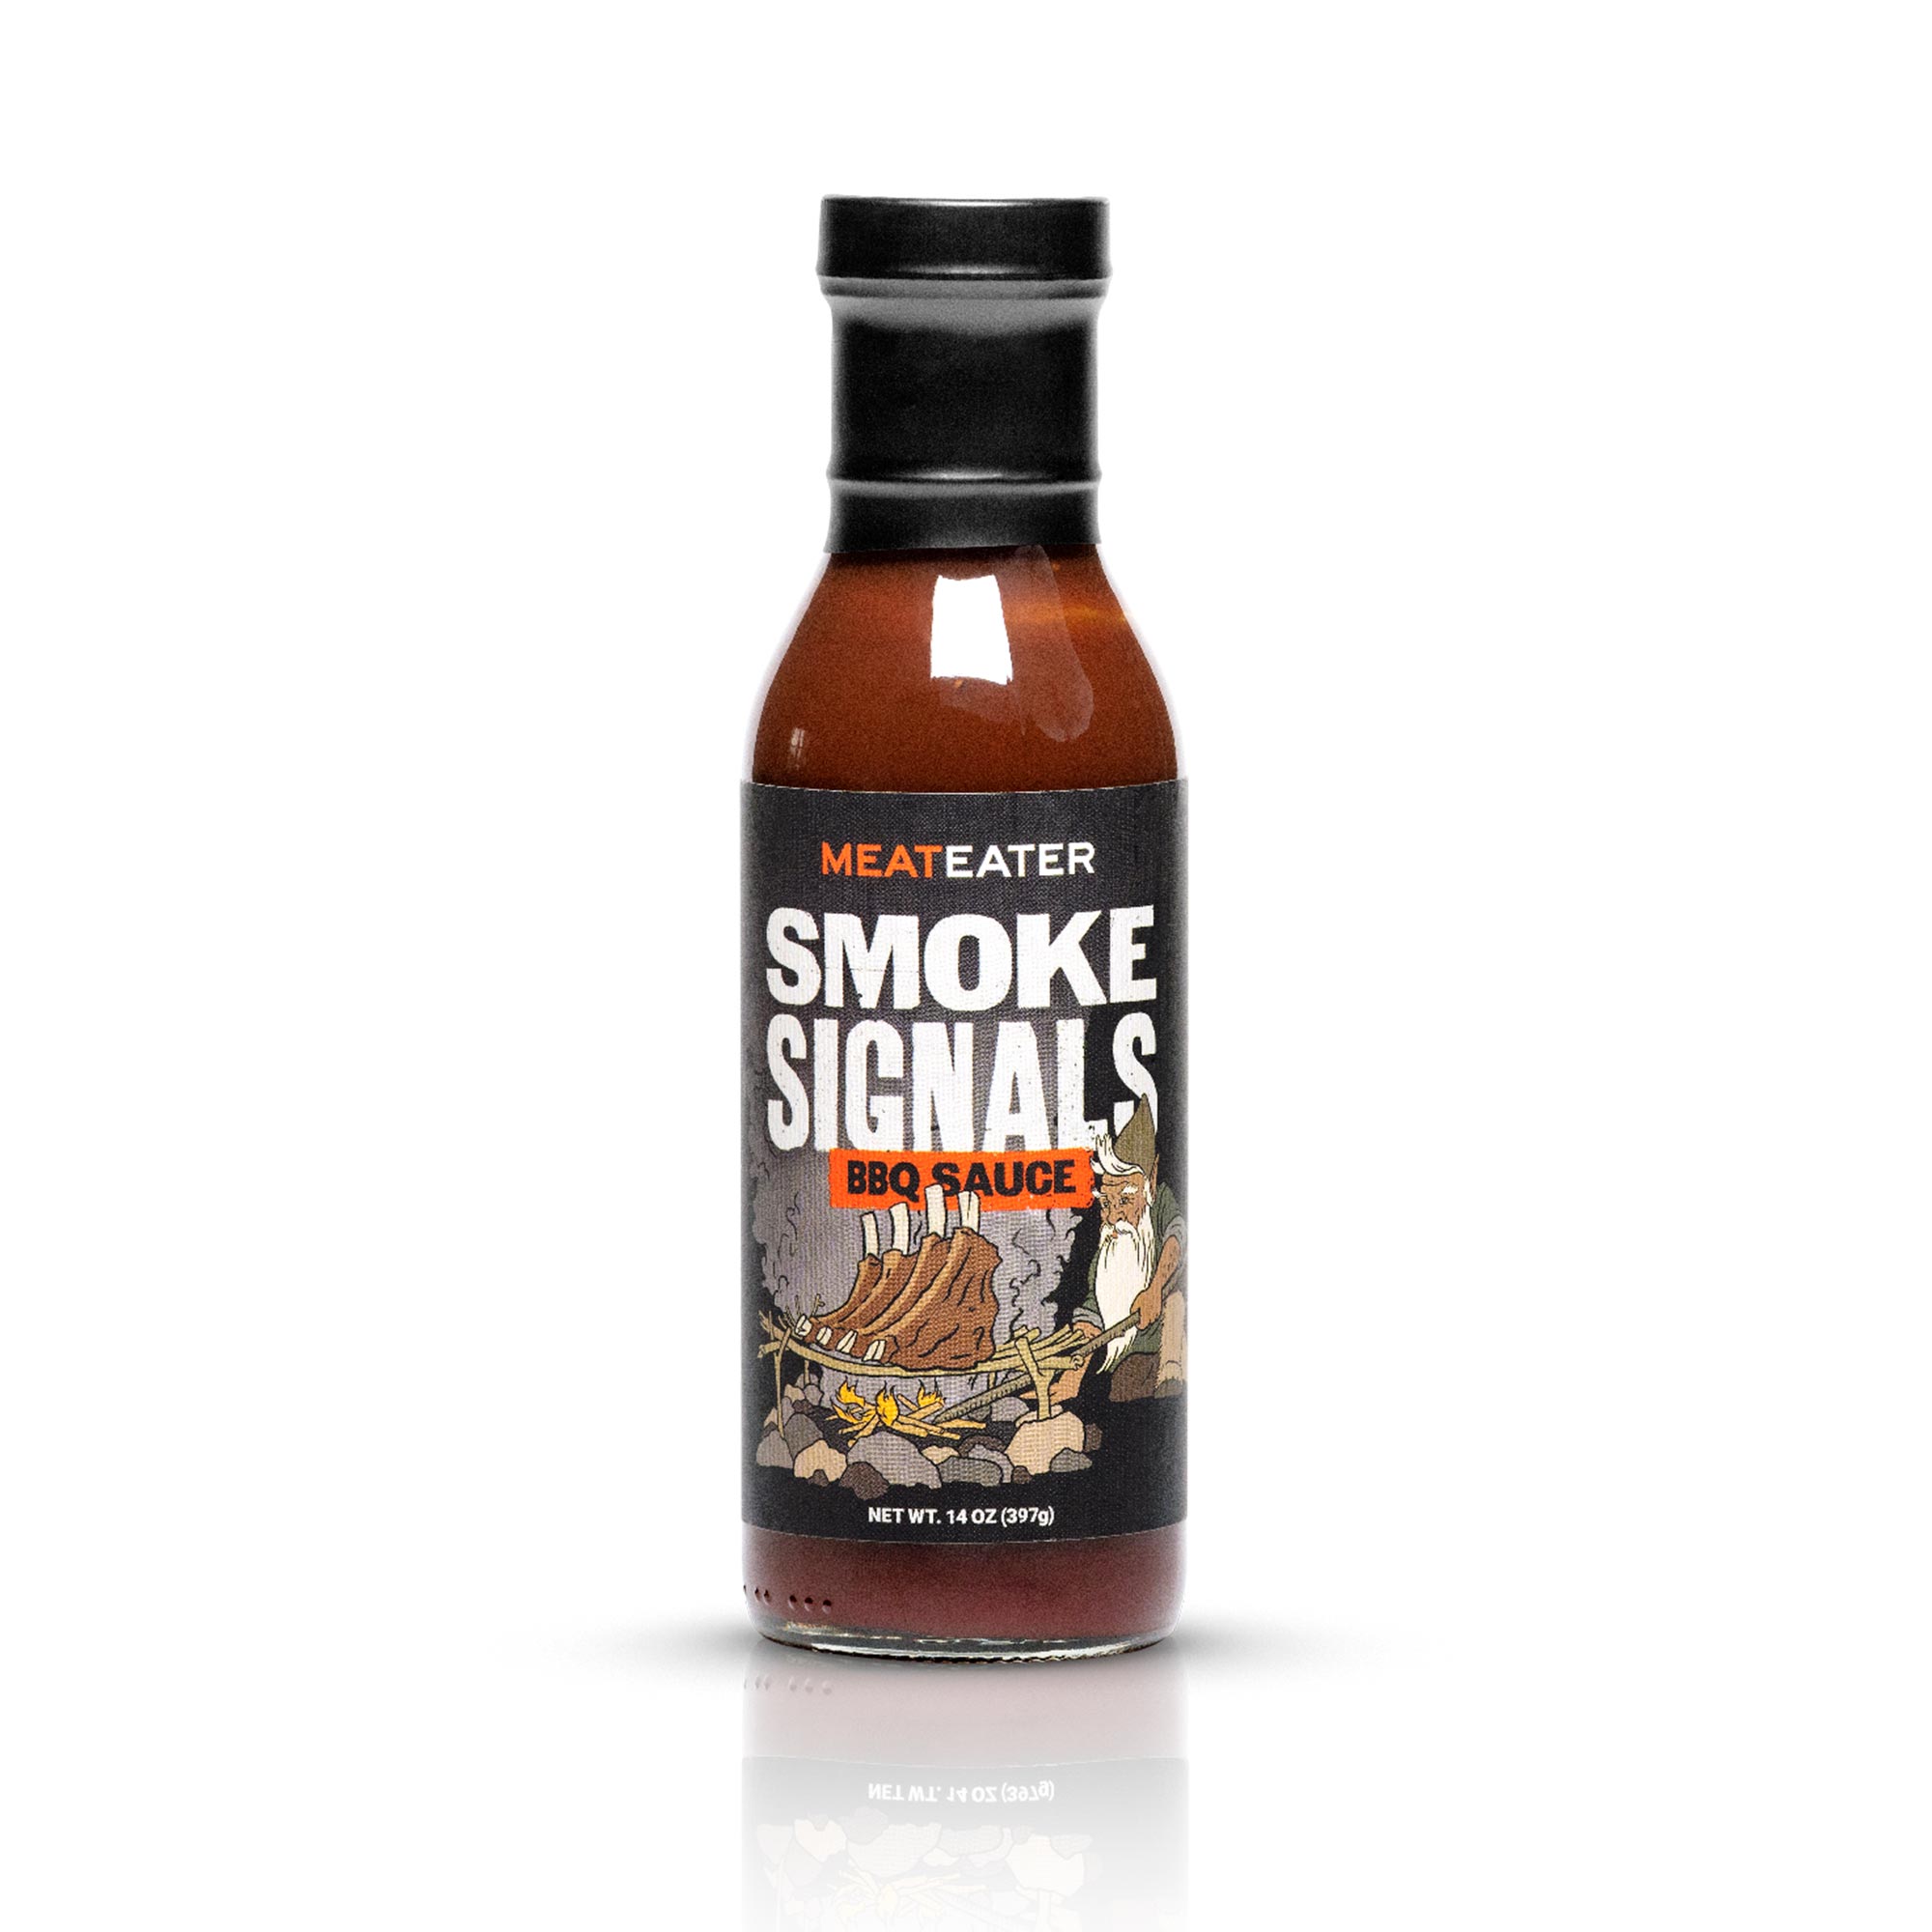 https://store.themeateater.com/on/demandware.static/-/Sites-meateater-master/default/dwdeae5941/meateater-motherlode-smoke-signals-bbq-sauce/meateater-motherlode-smoke-signals-bbq-sauce_global_primary.jpg